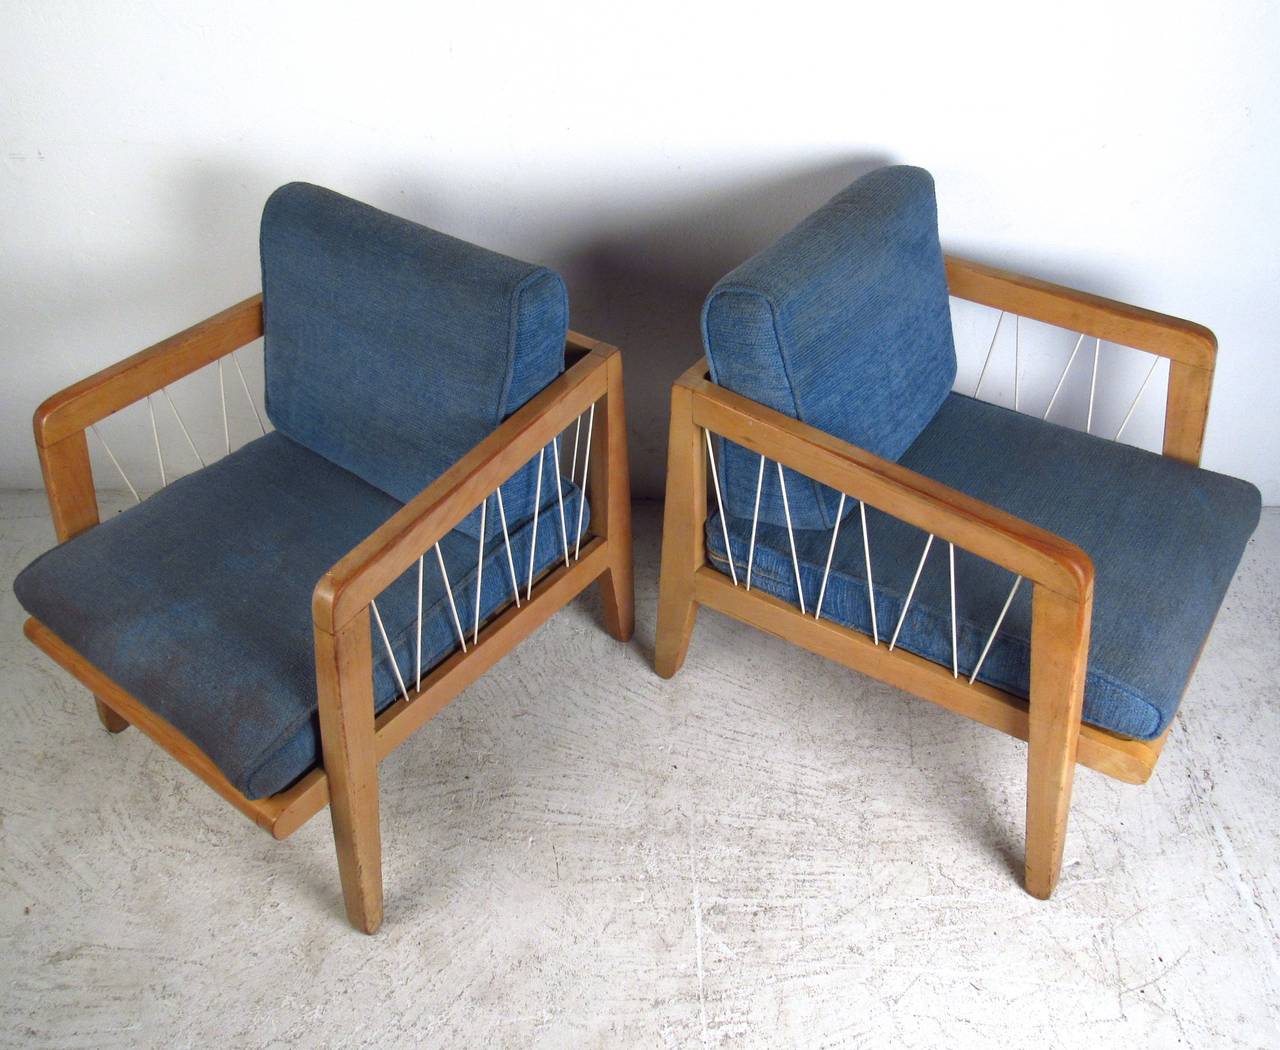 Mid-Century Modern Pair of Edward Wormley Club Chairs for Drexel, c. 1947